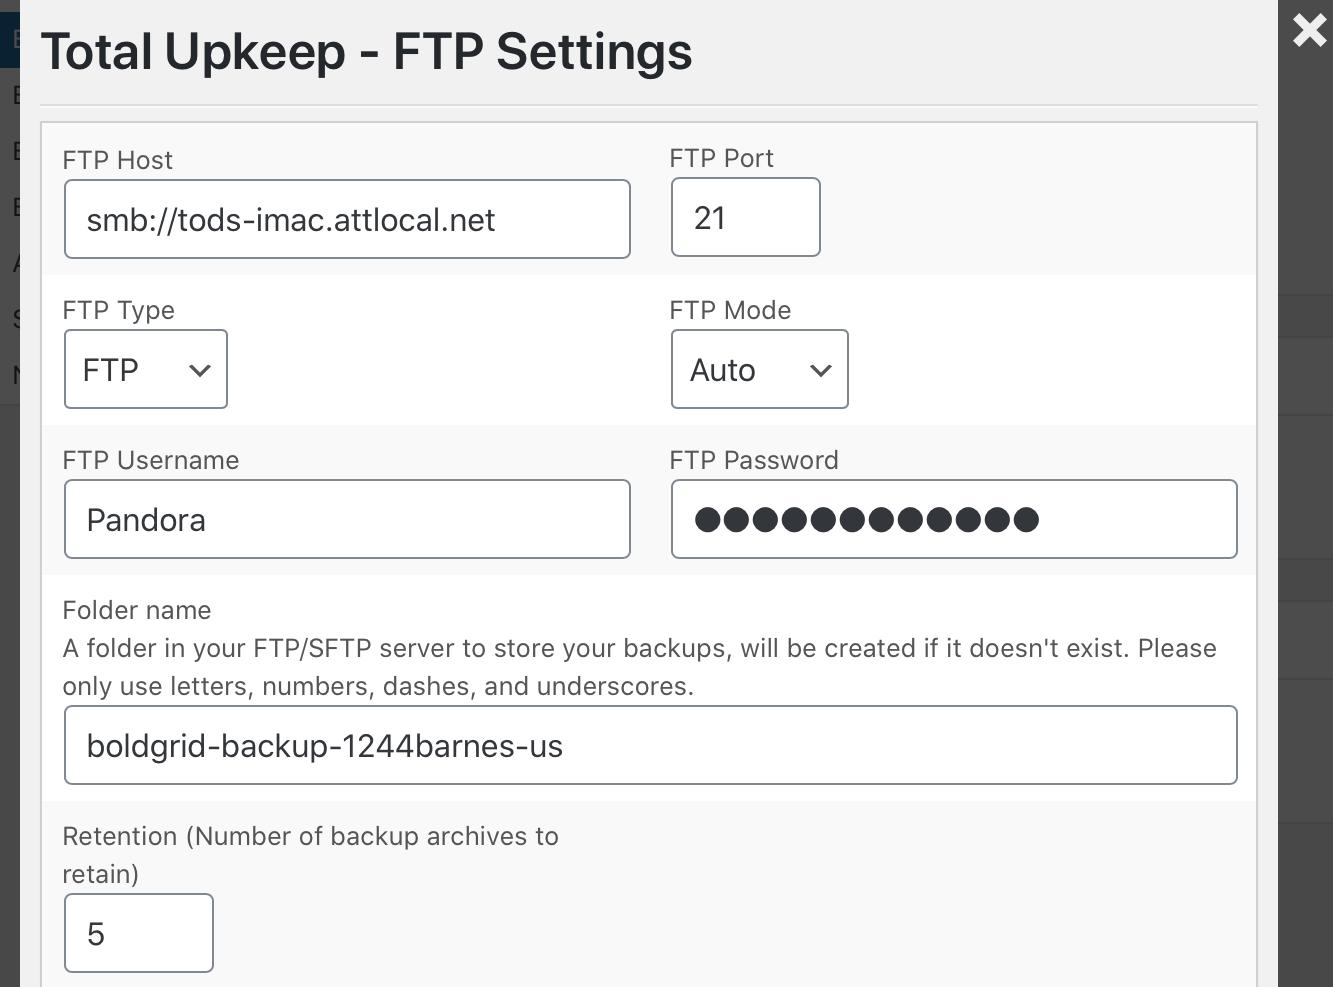 FTP Settings for Total Upkeep